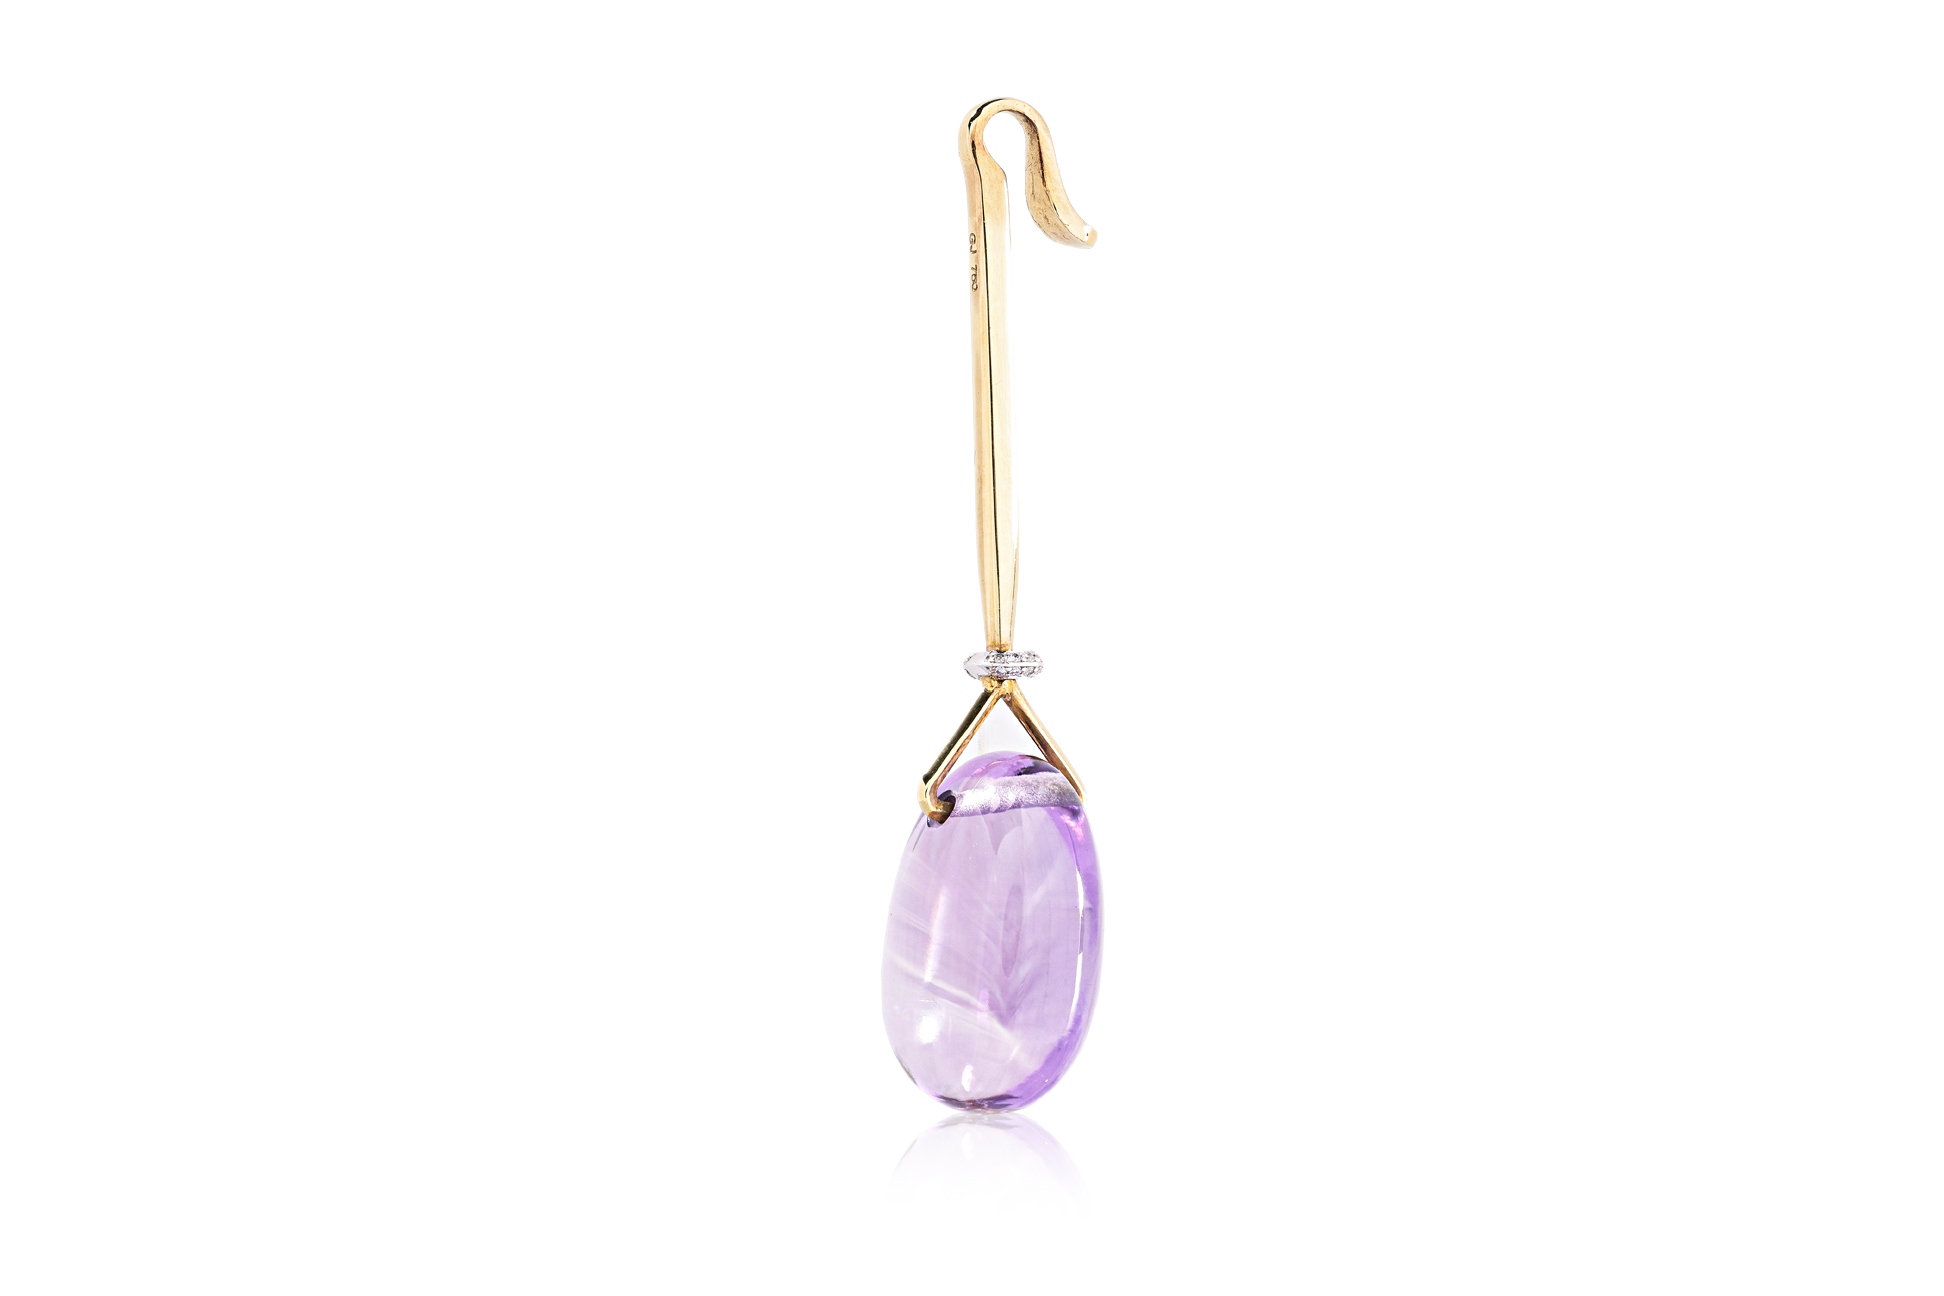 AN AMETHYST AND DIAMOND 'DEW DROP' PENDANT BY GEORG JENSEN - Image 3 of 5